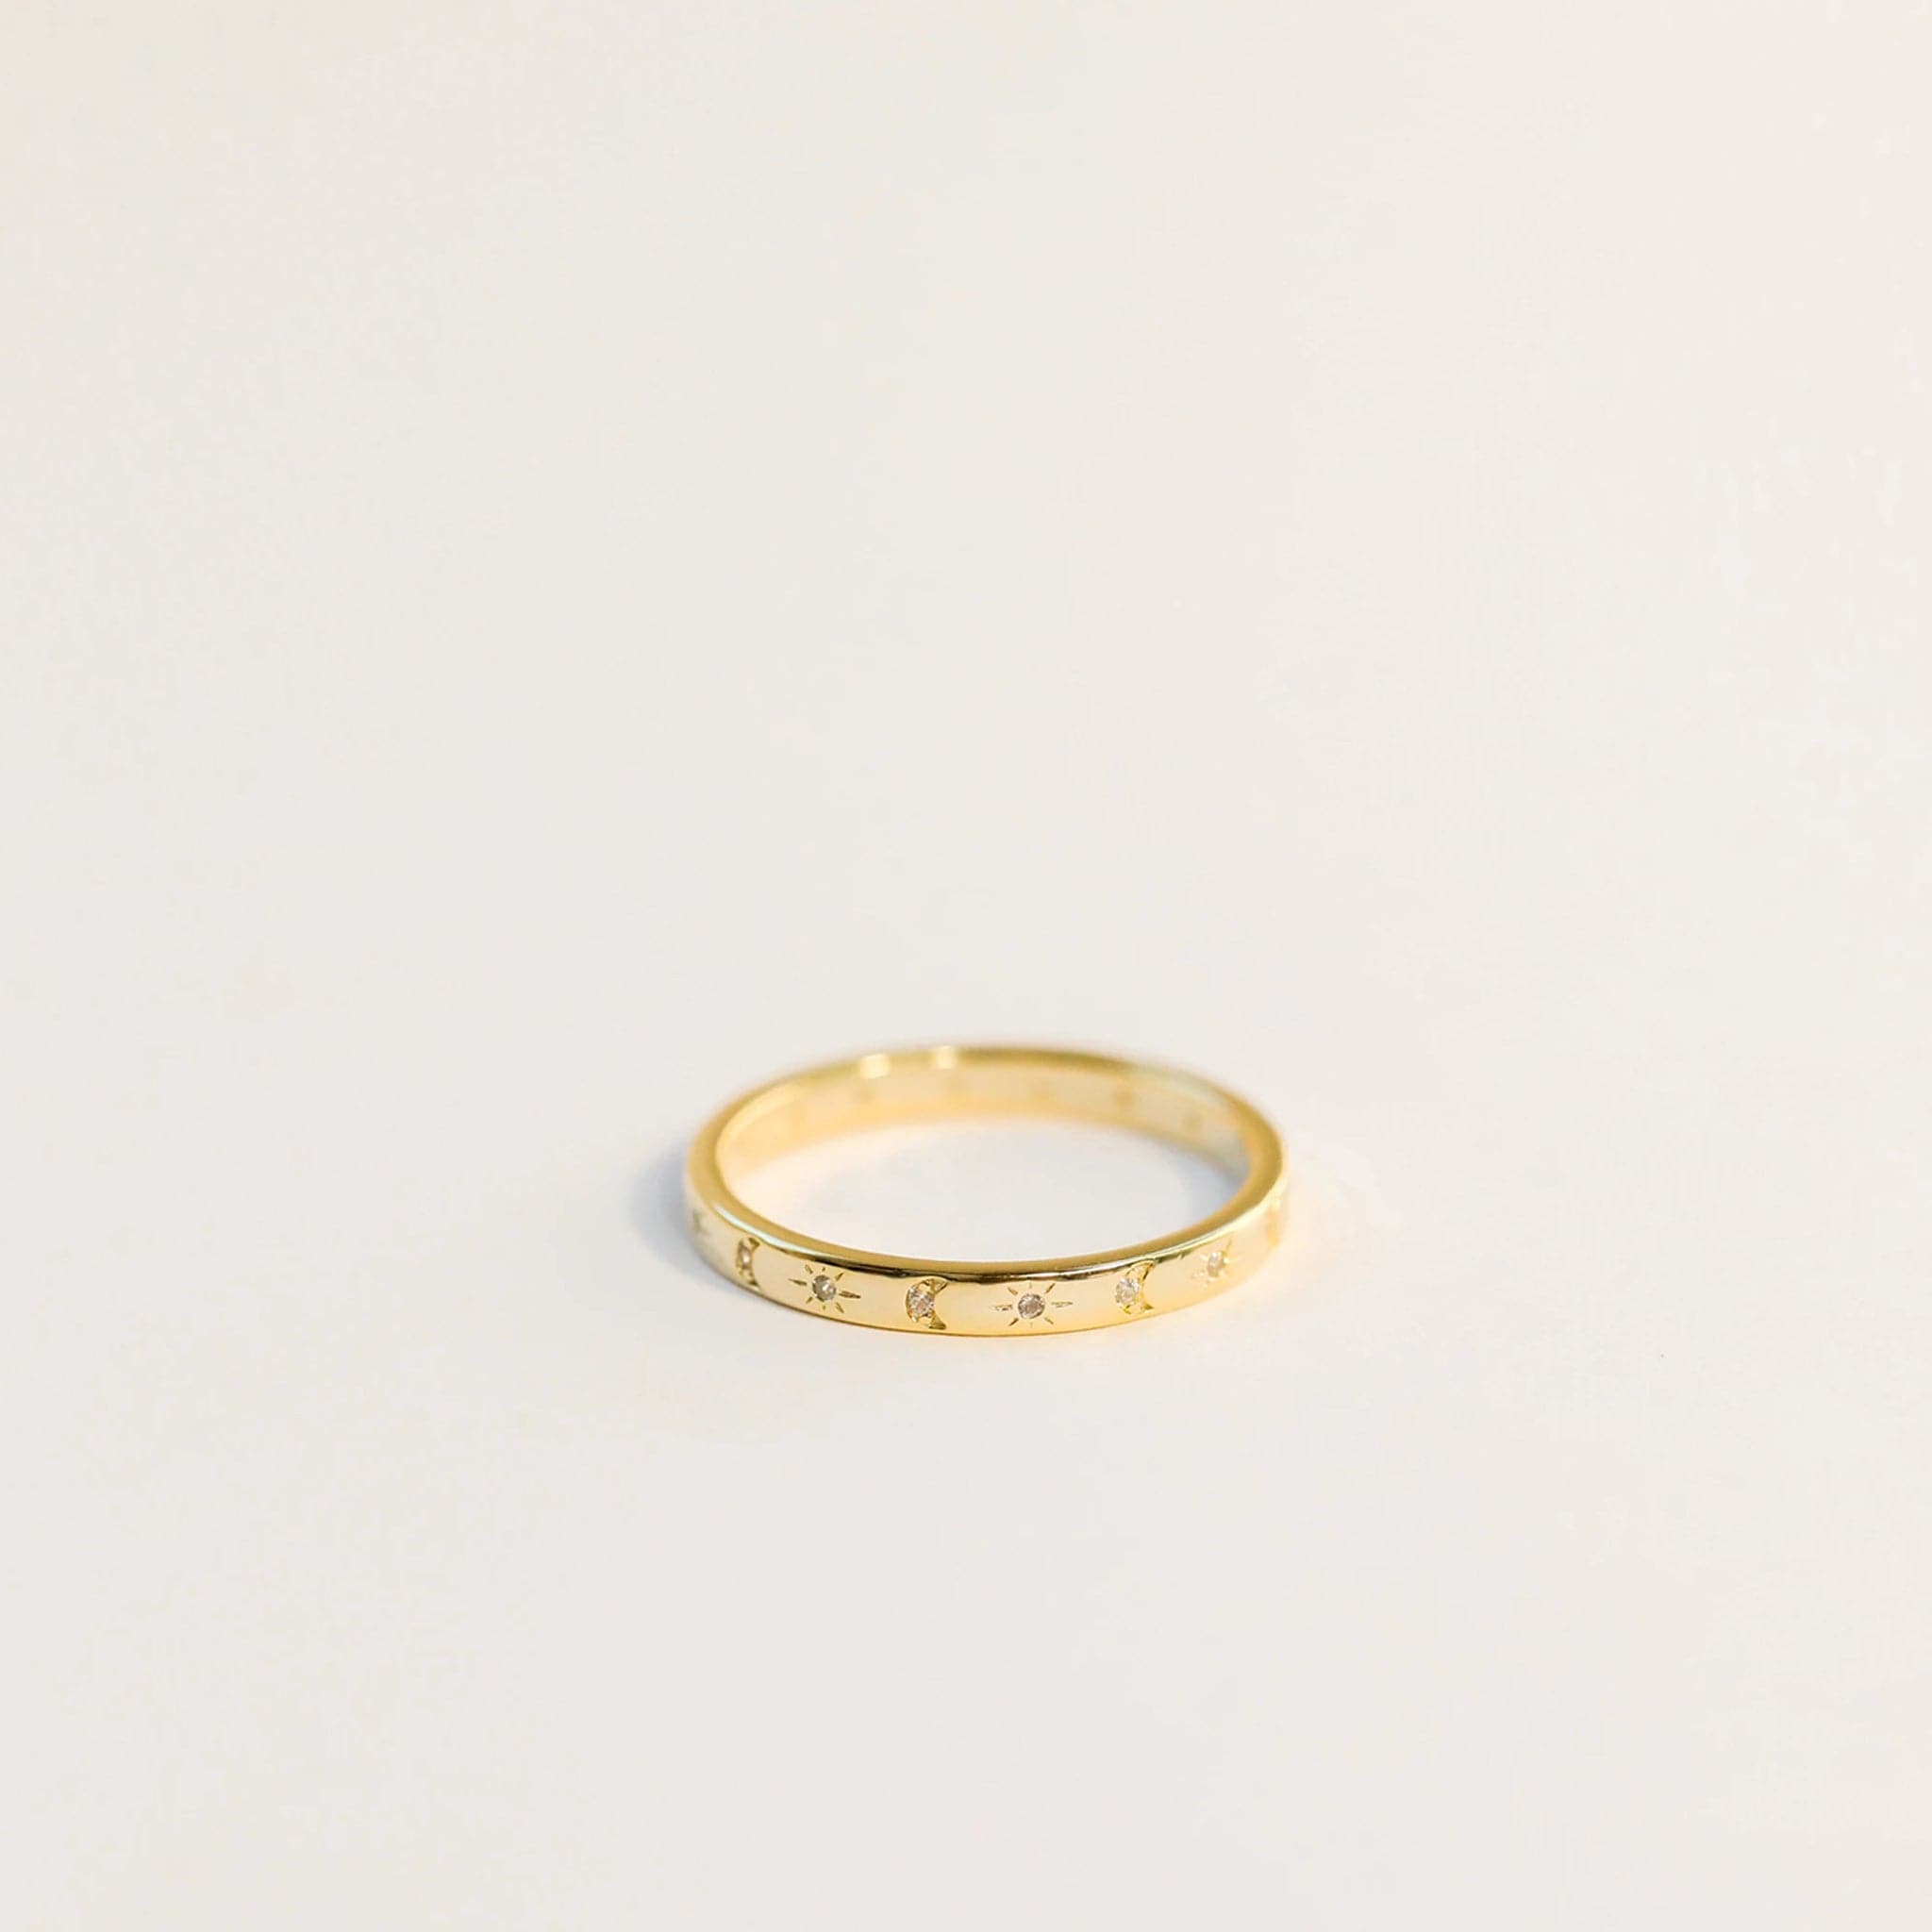 Delicate gold ring with etched suns and moons circling the band. Each sun and moon has a CZ gem in the center.